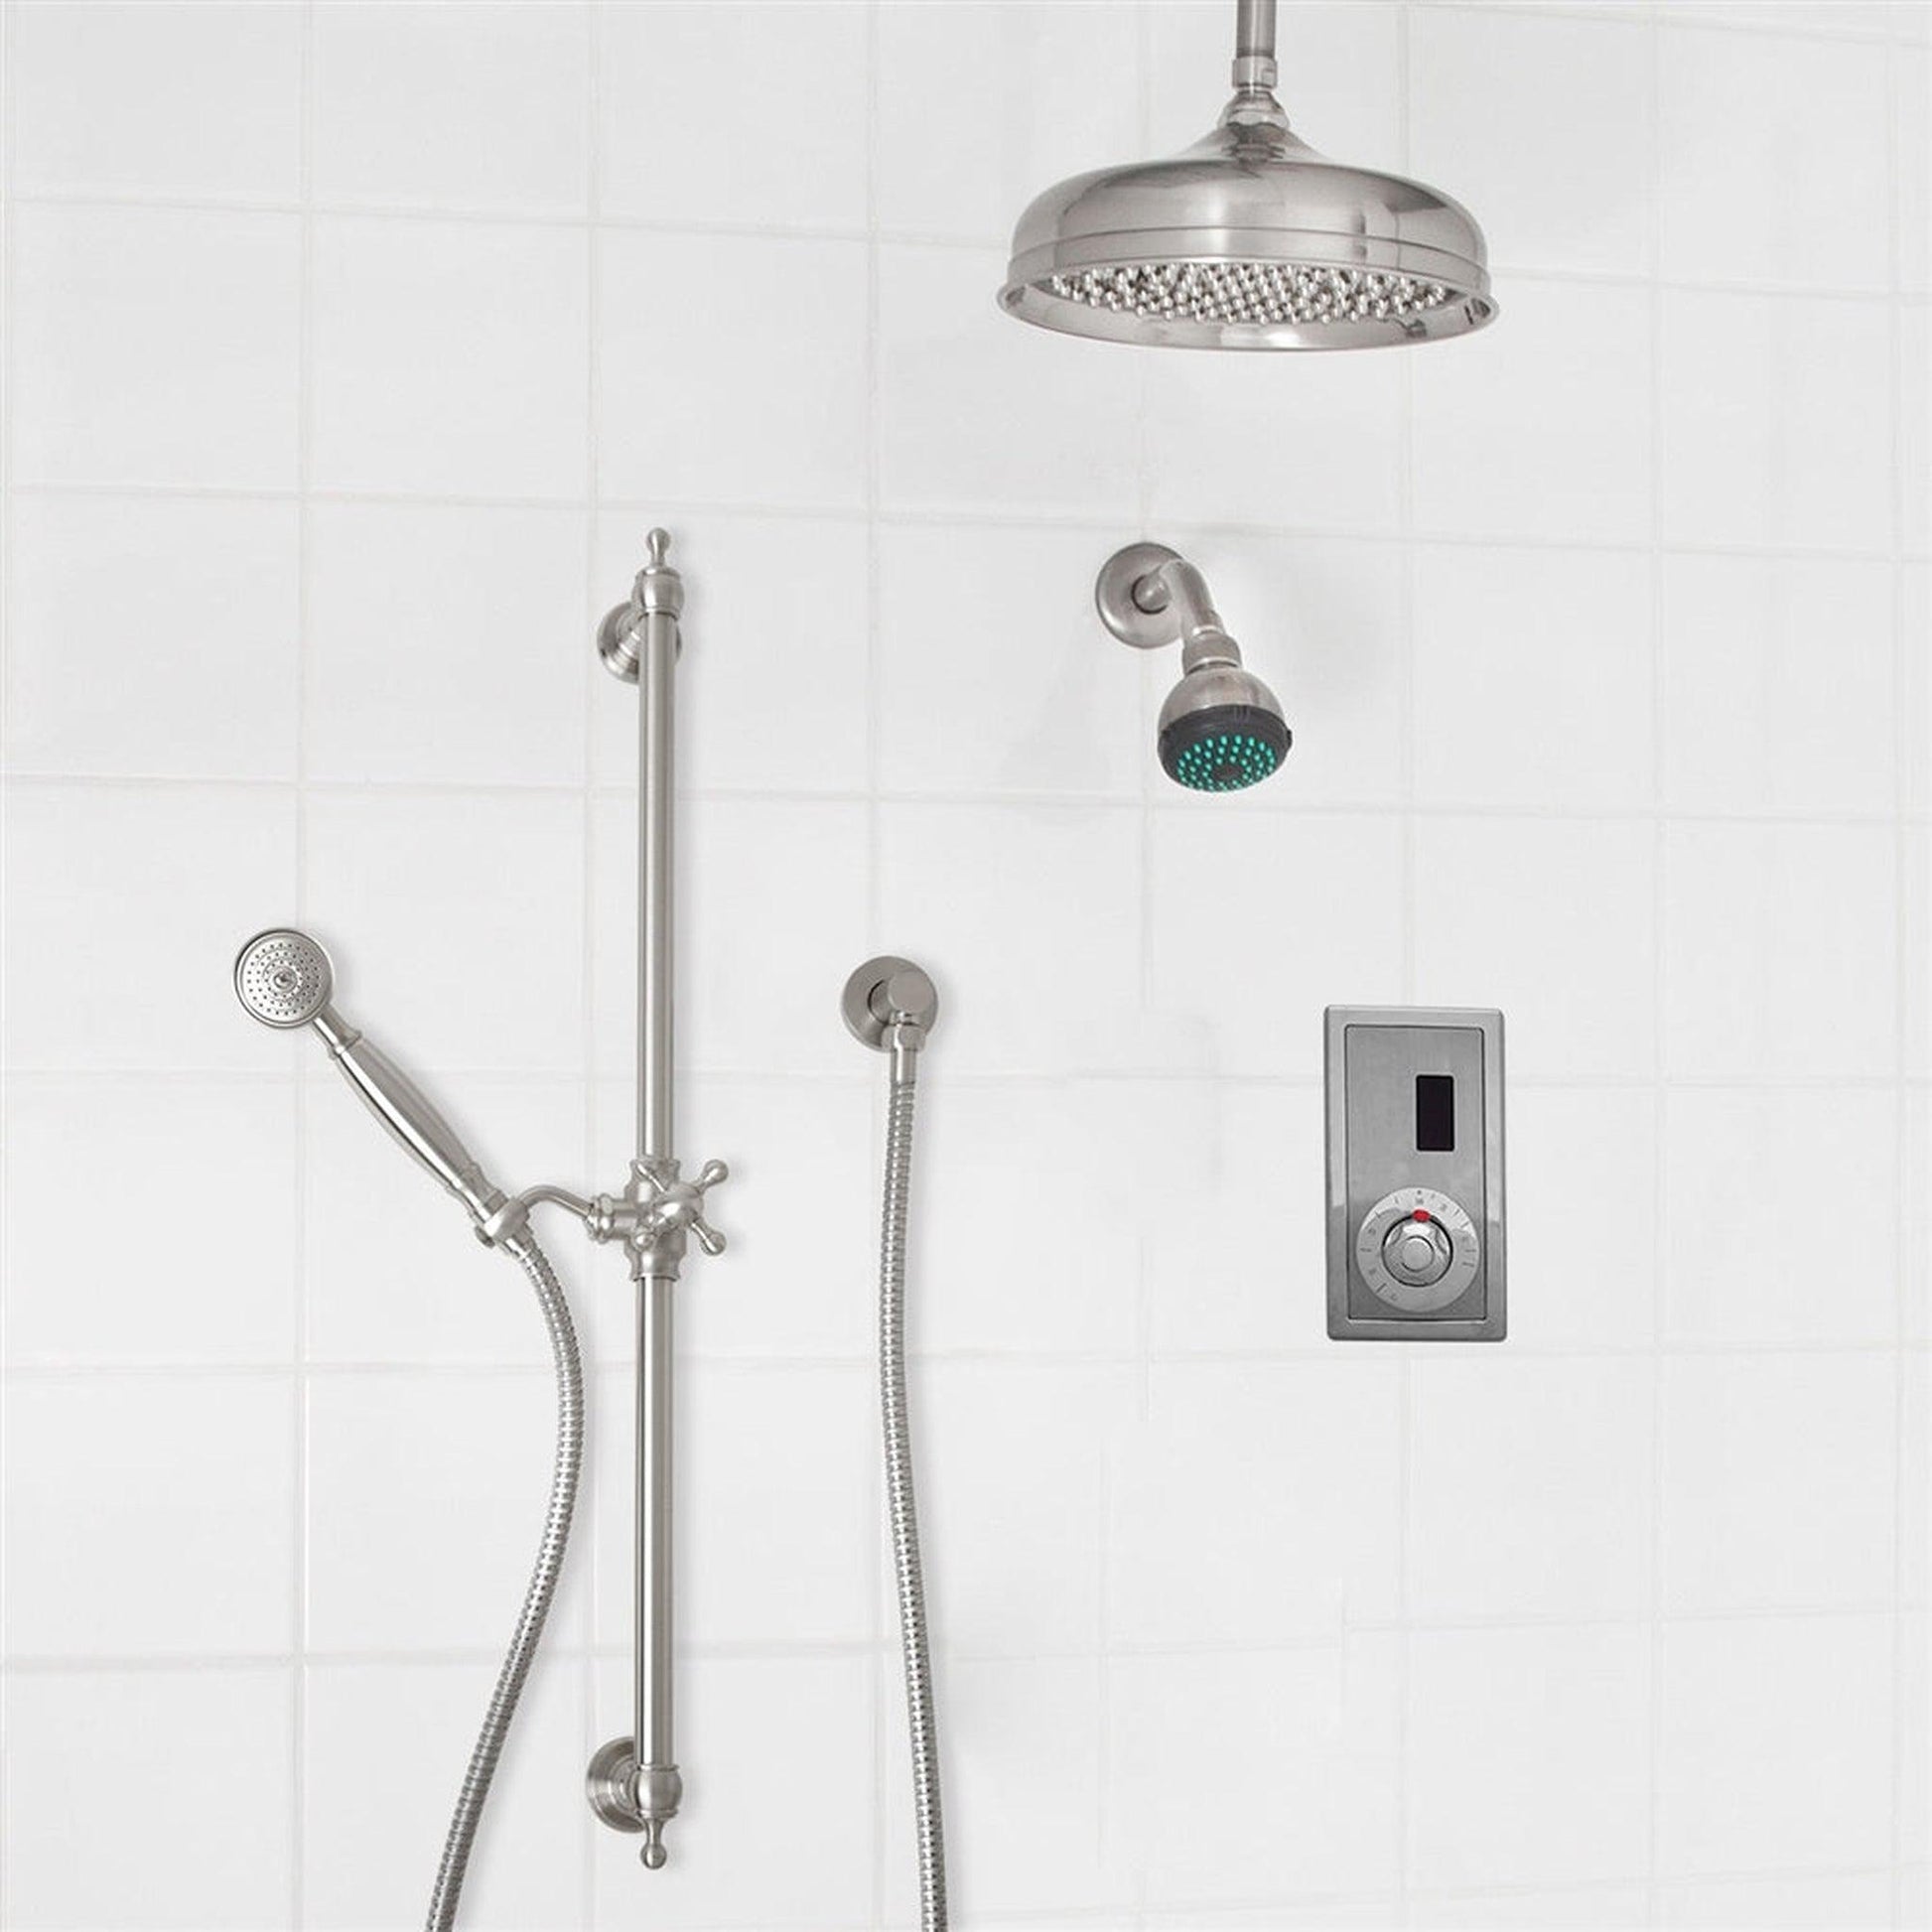 Fontana 24" Brushed Nickel Dual Shower Head Luxury Bathroom Automatic Thermostatic Sensor Temperature Dial Shower System With Hand Shower